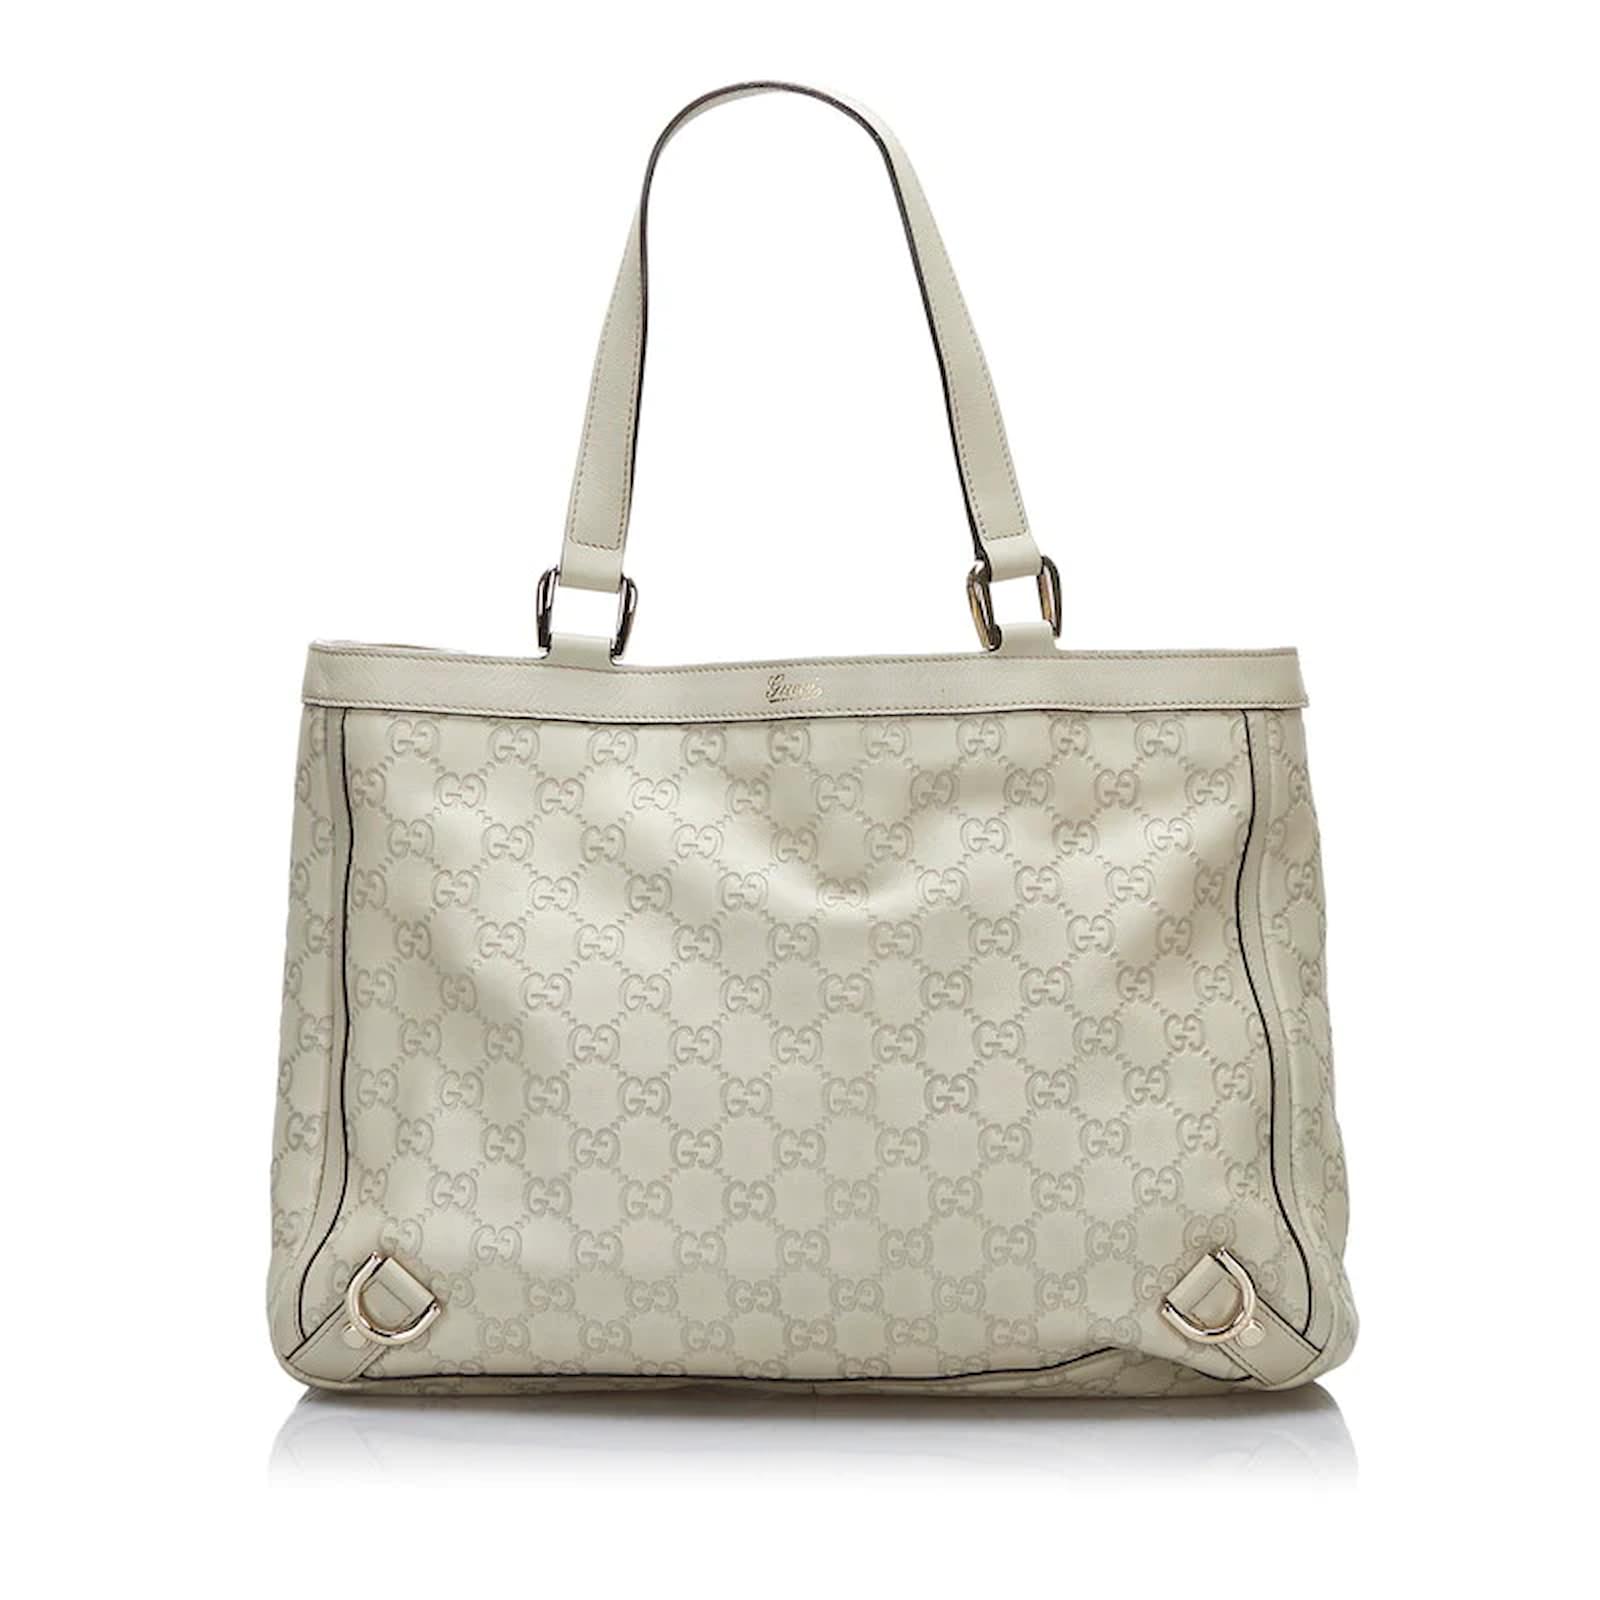 Guccissima Leather Abbey Tote Bag 170004 White Pony-style calfskin